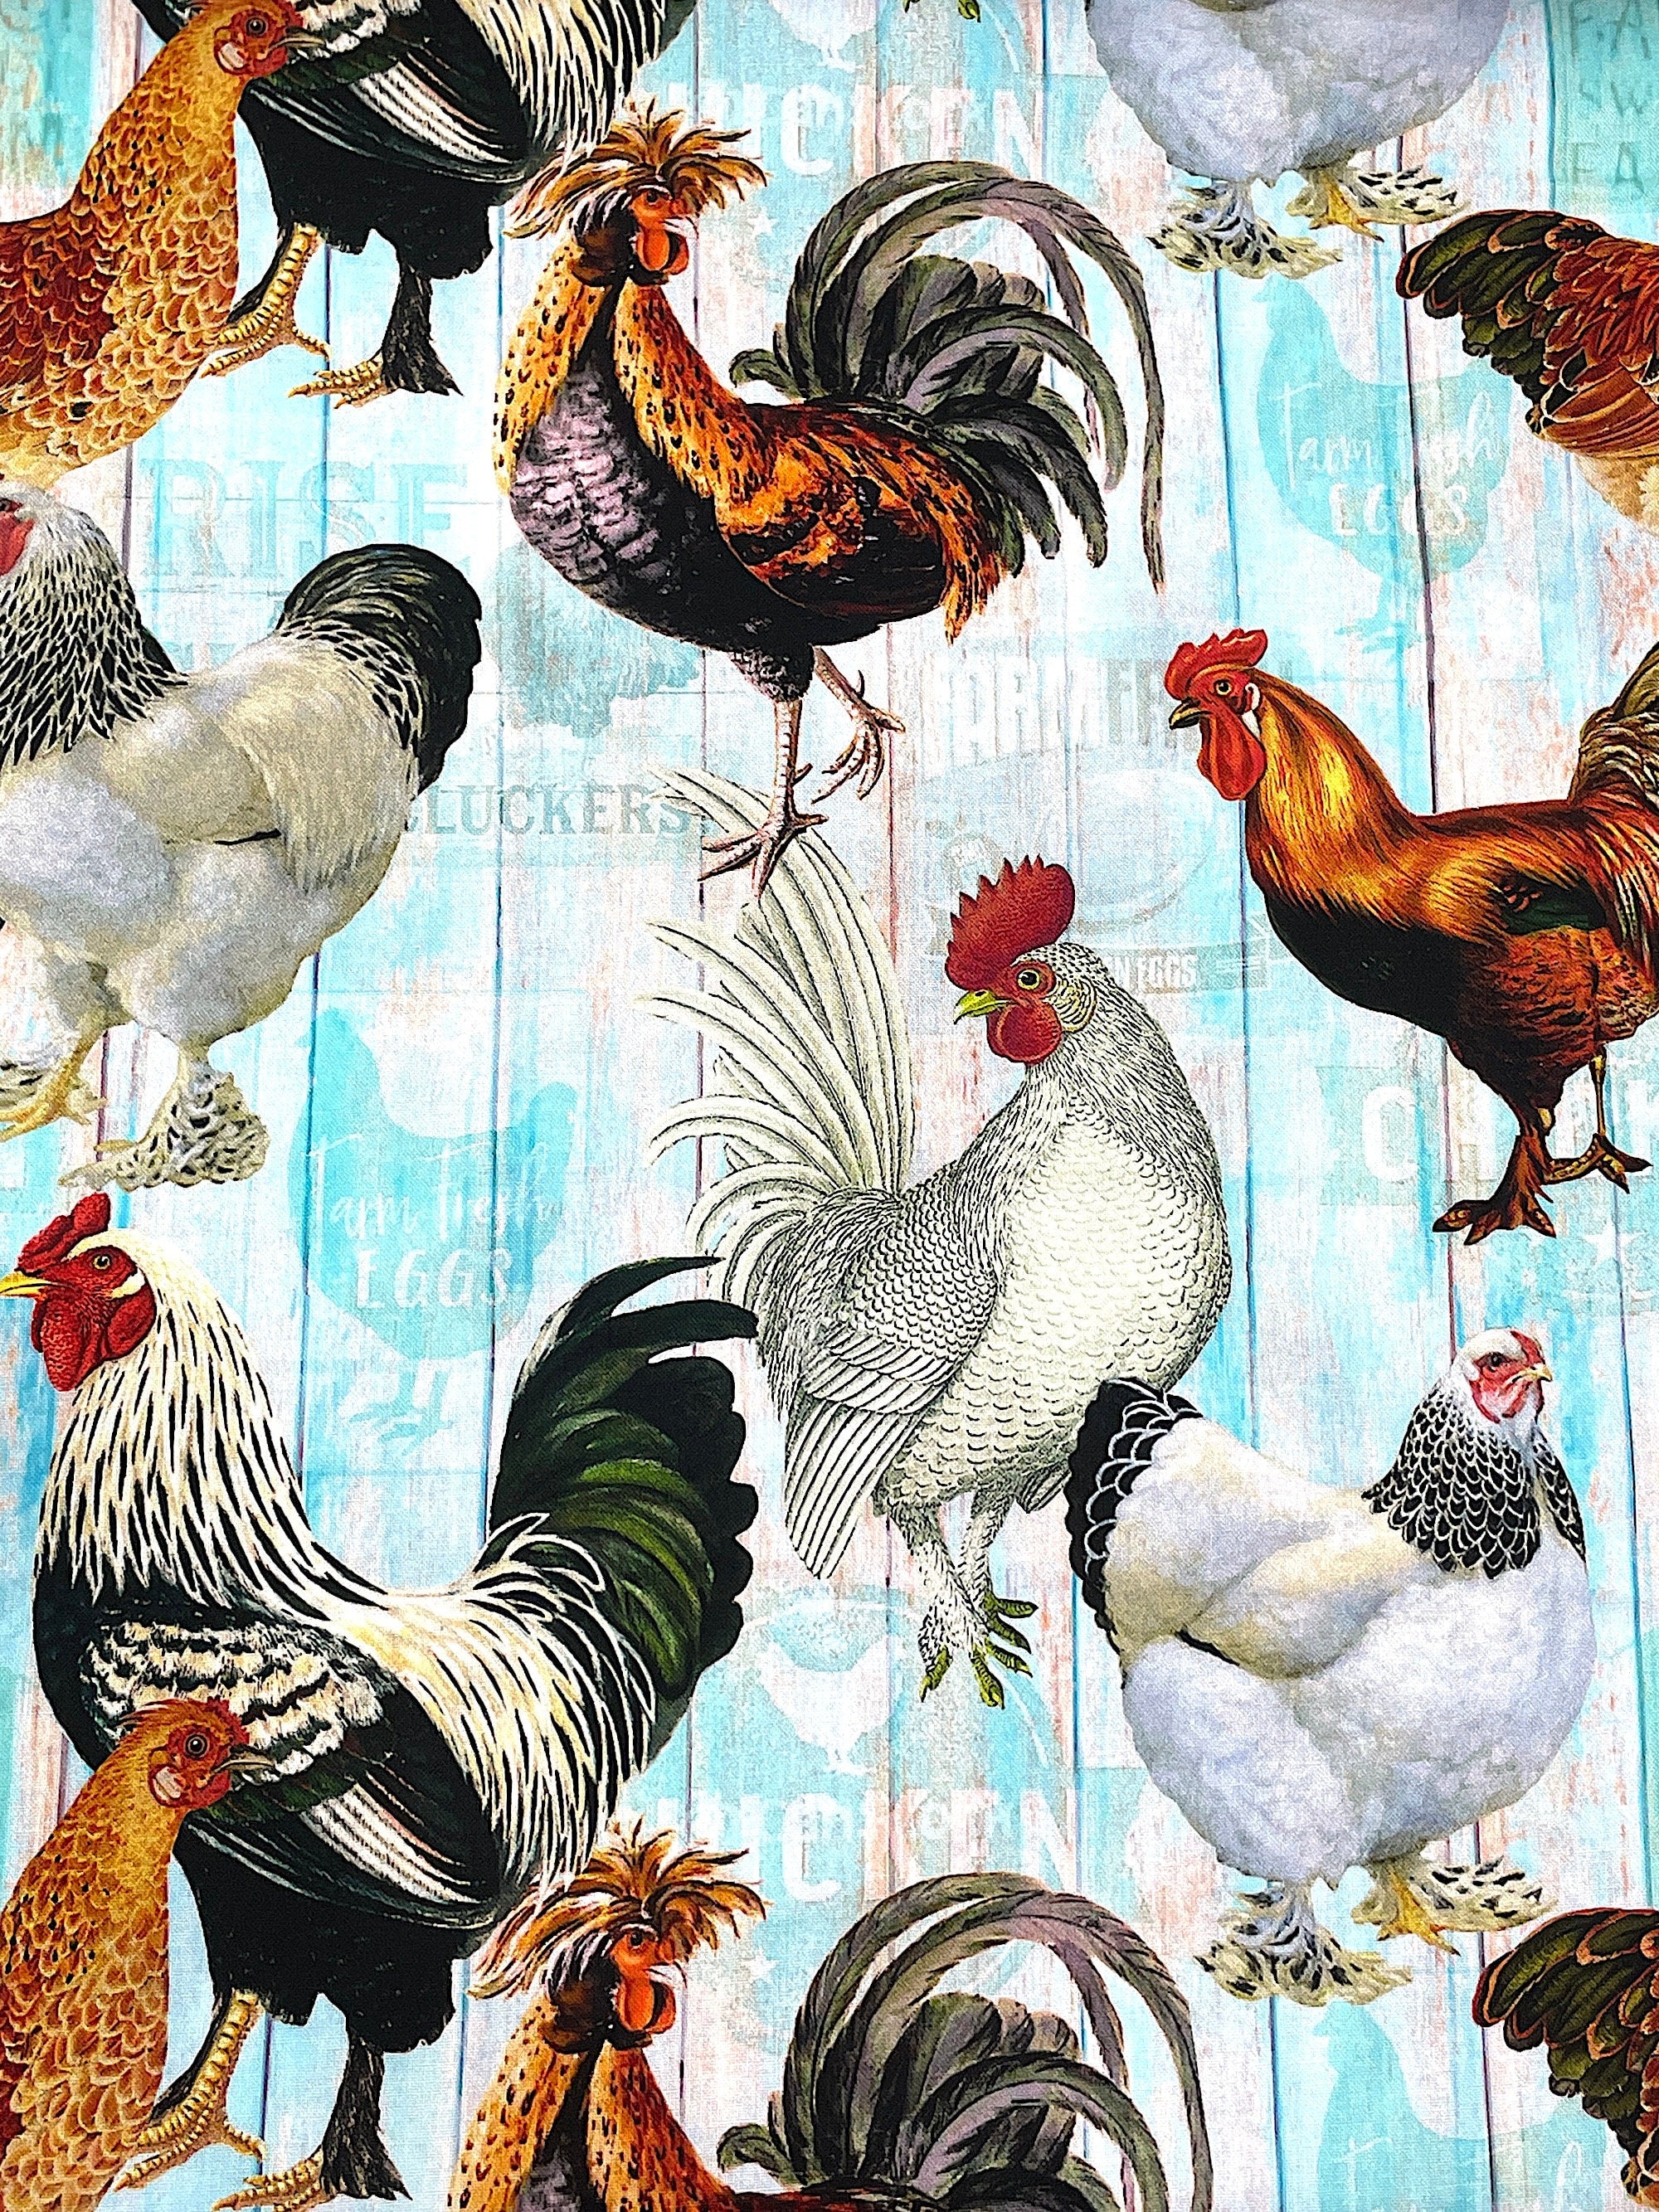 This fabric is covered with a faded fence in blue and white. In front of the fence are chickens that are black, white, and shades of brown.